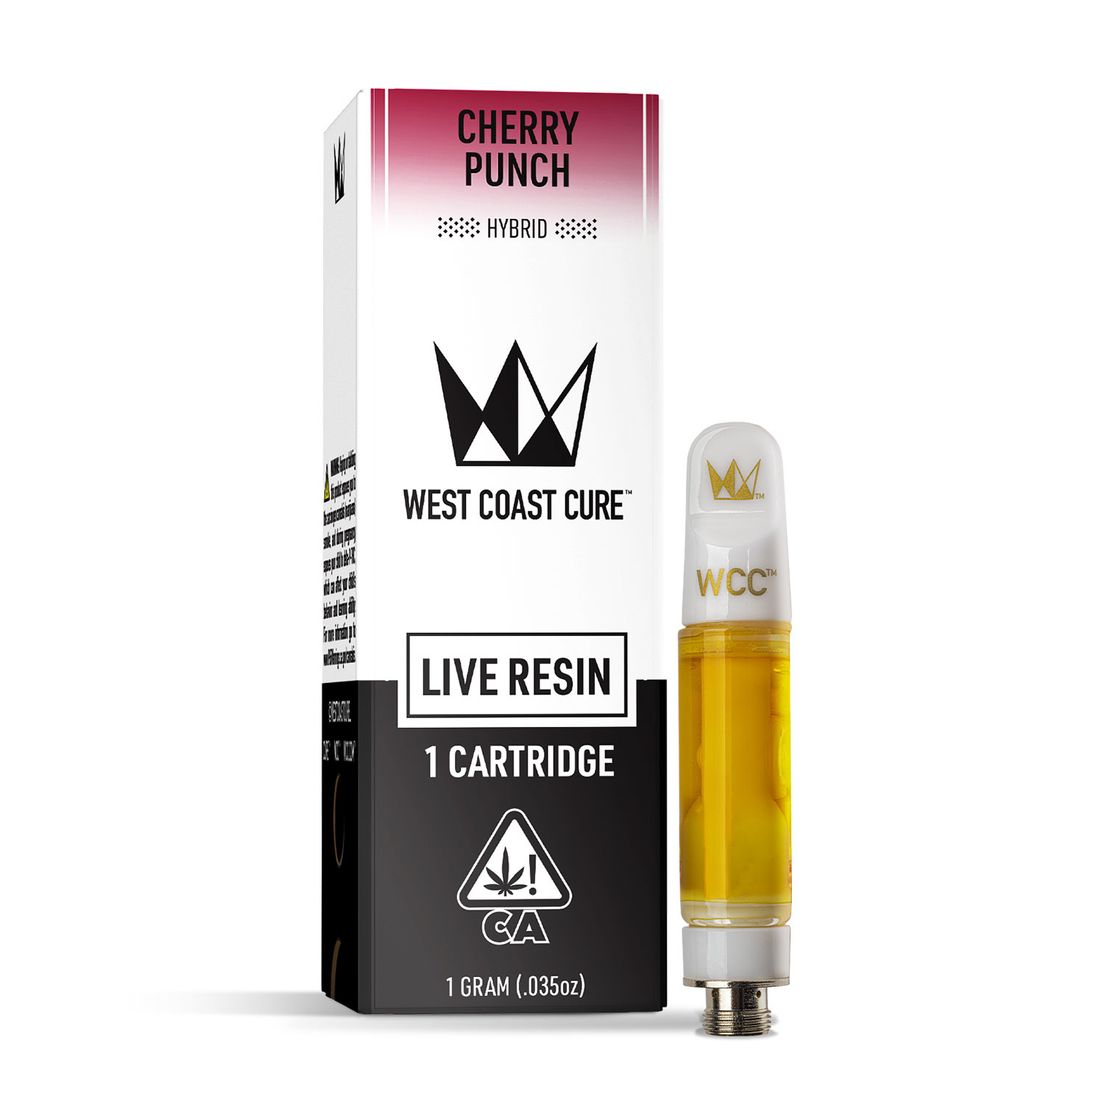 West Coast Cure - Cherry Punch Live Resin Cartridge - 1G 1g